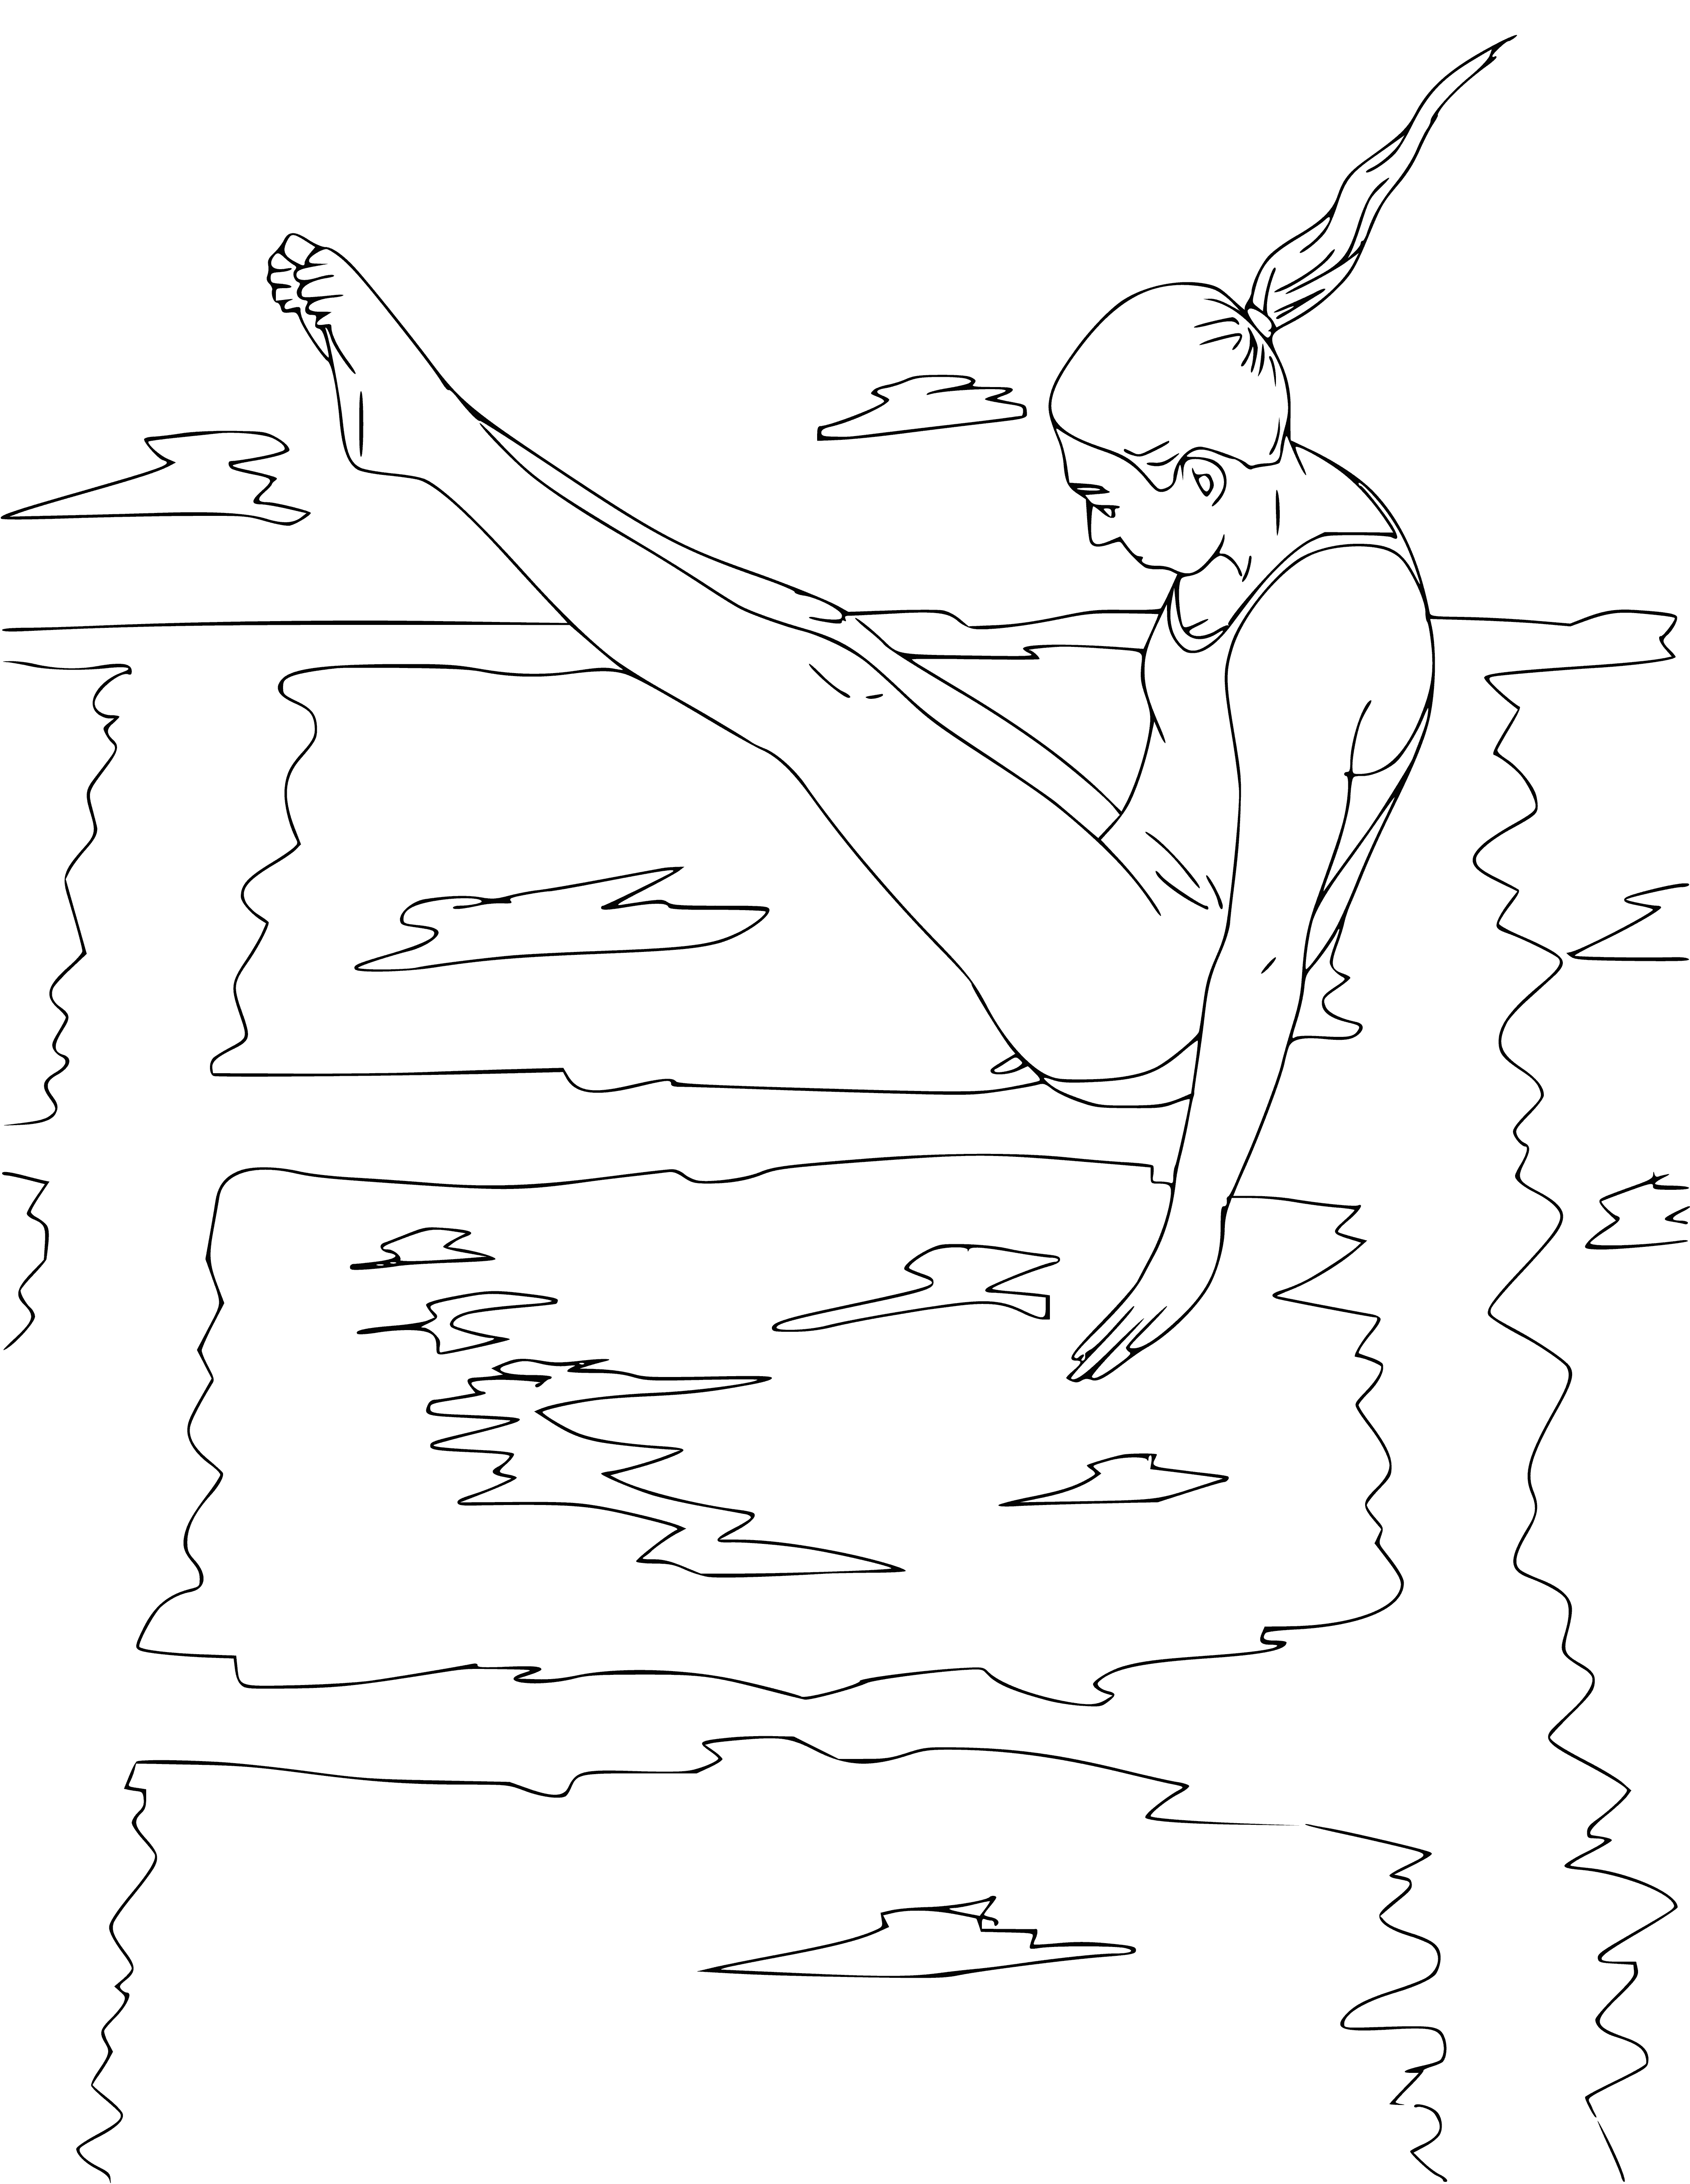 Jumping into the water from a springboard coloring page